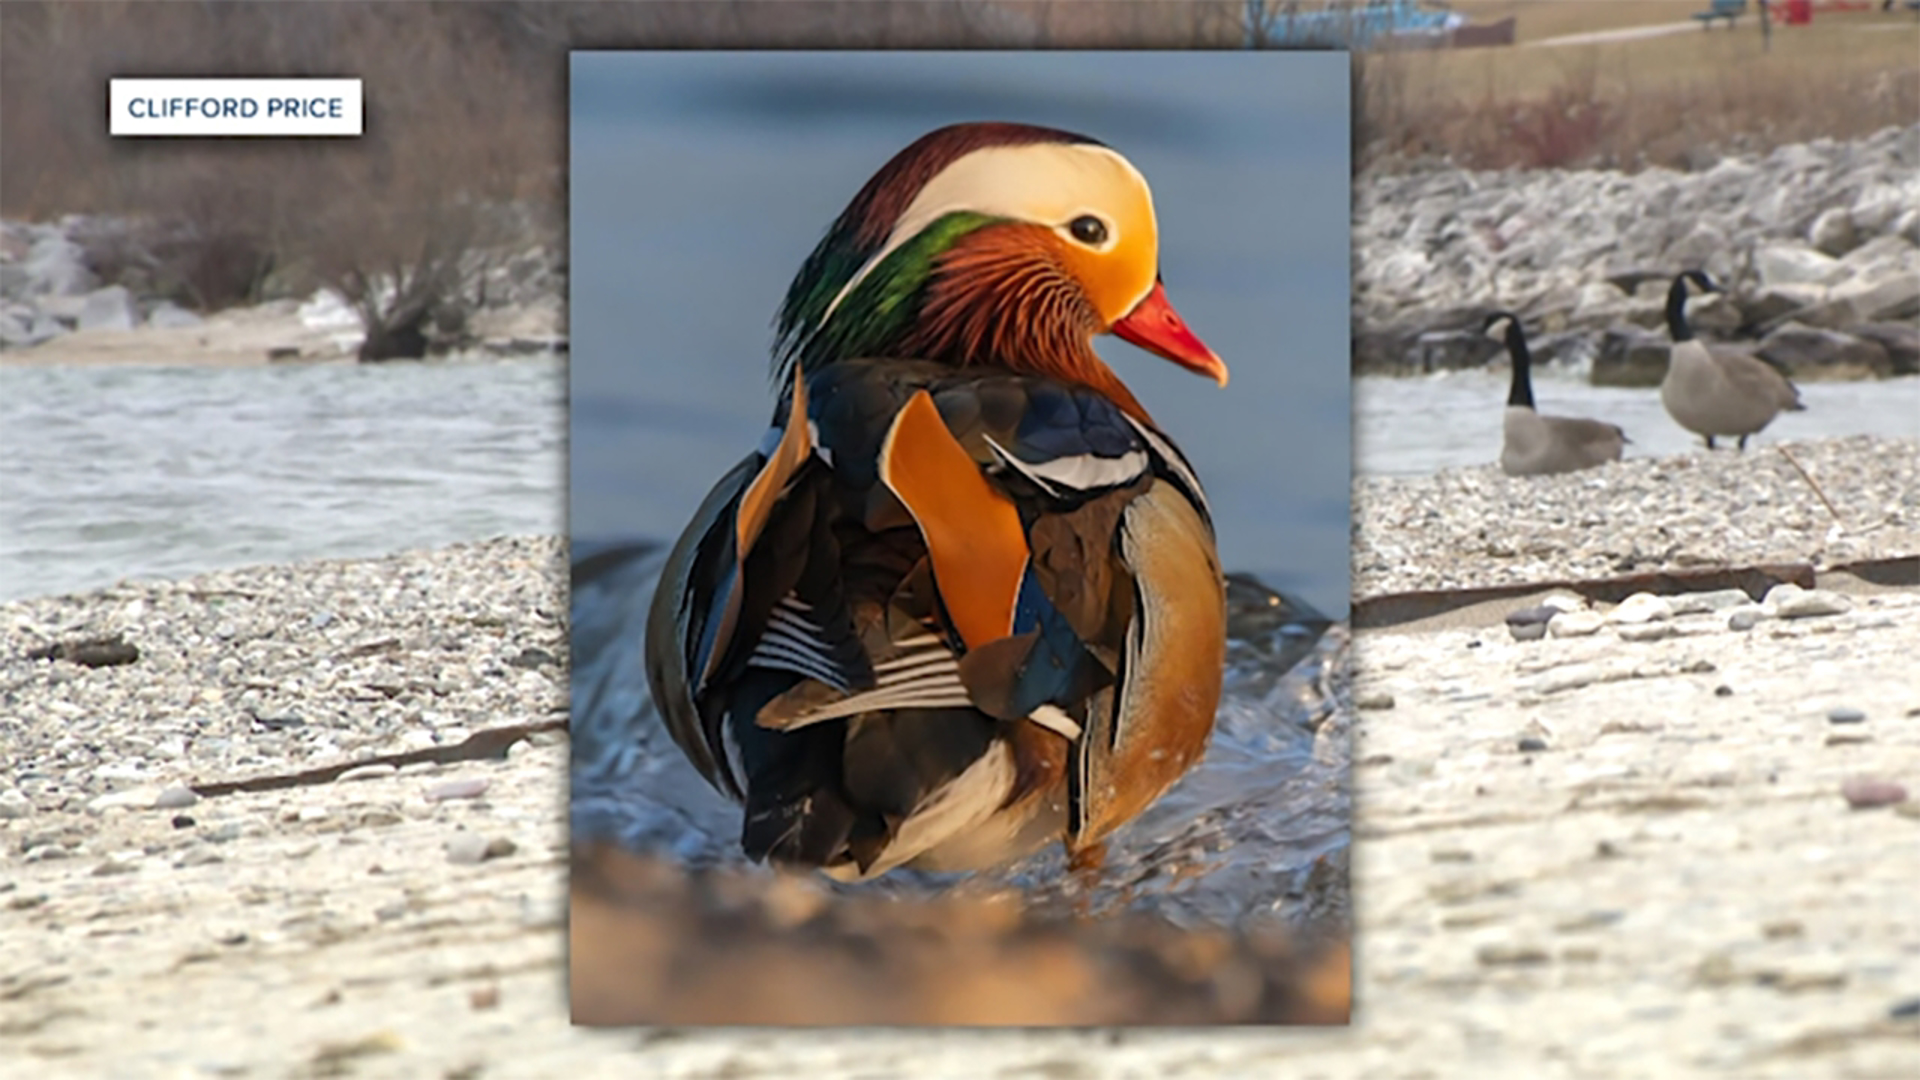 The duck, which is usually found in Eastern Asia, was spotted near South Shore Park in Milwaukee, Wisconsin.